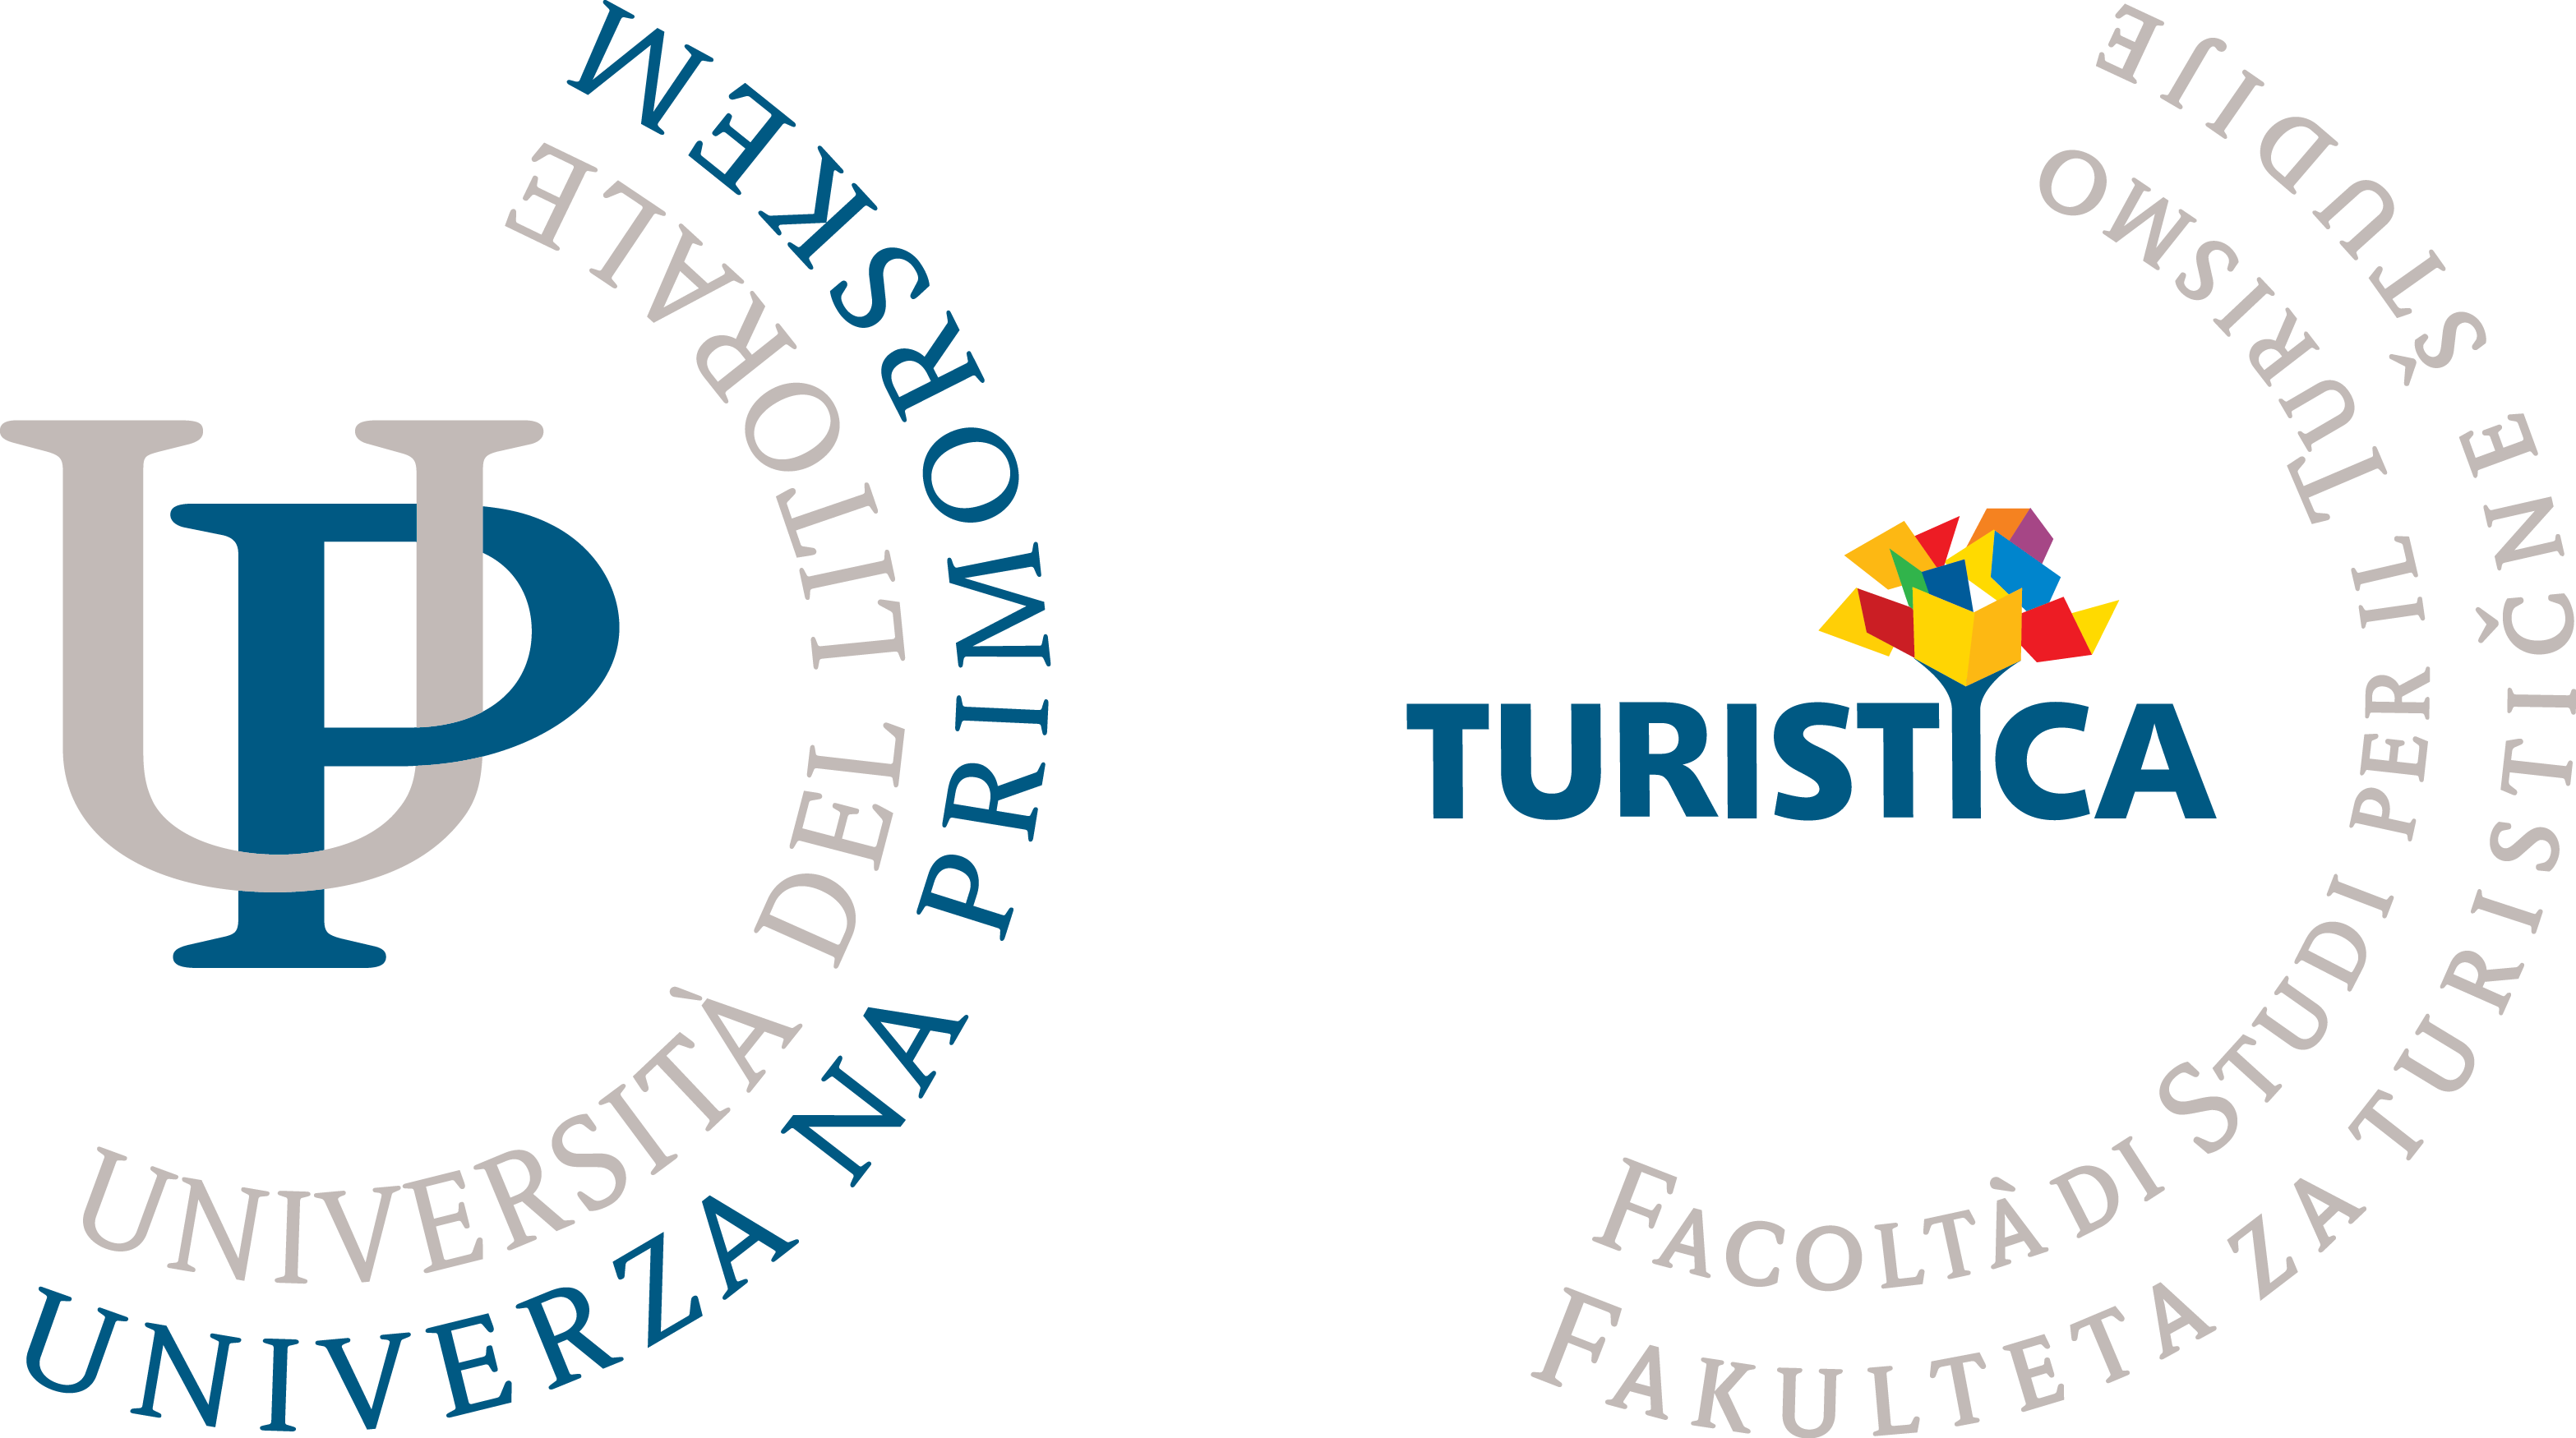 THE FACULTY OF TOURISM STUDIES – TURISTICA main image